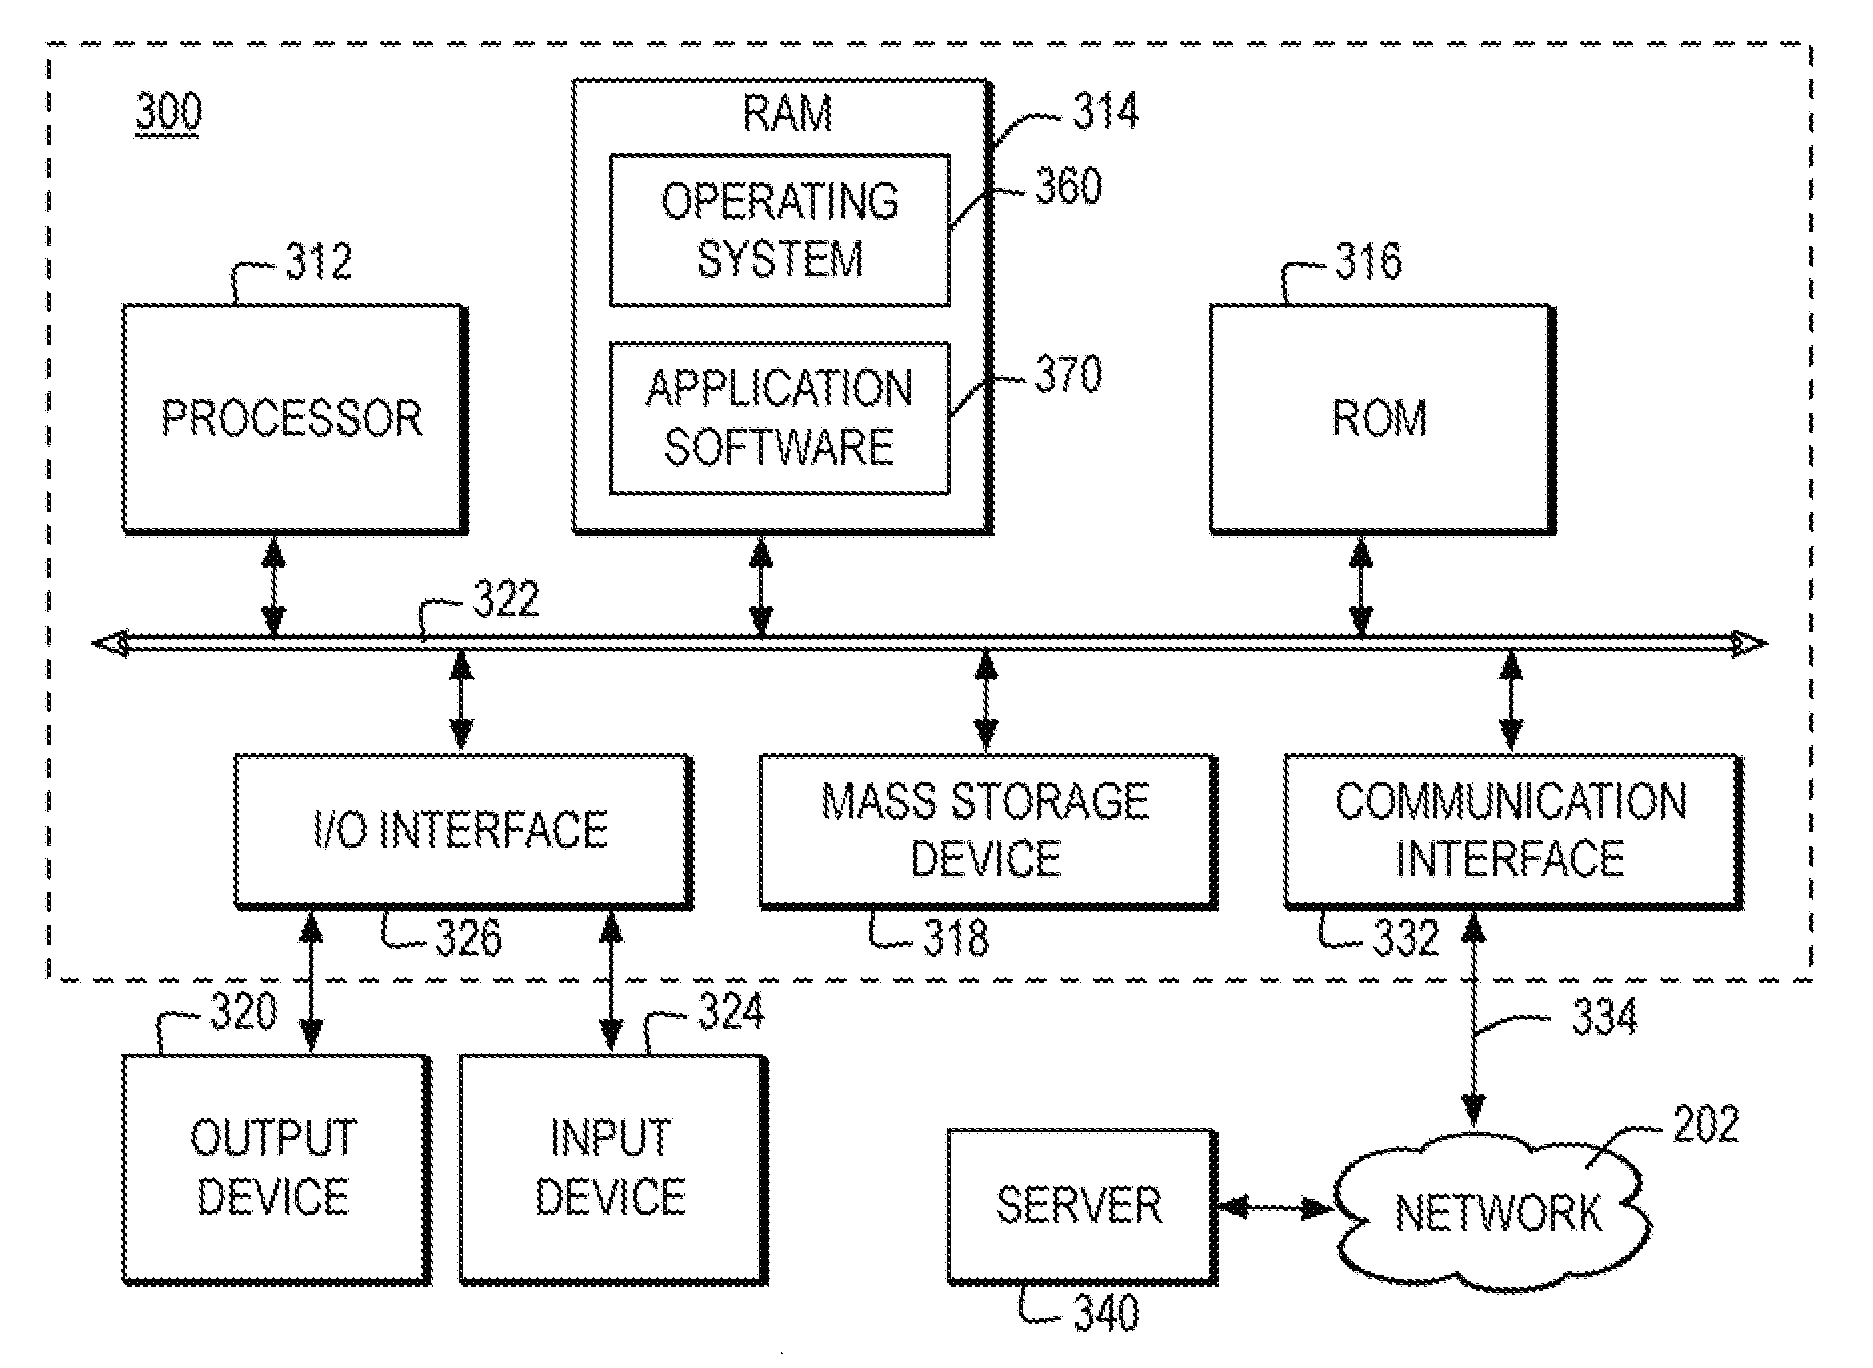 Failover in a host concurrently supporting multiple virtual IP addresses across multiple adapters